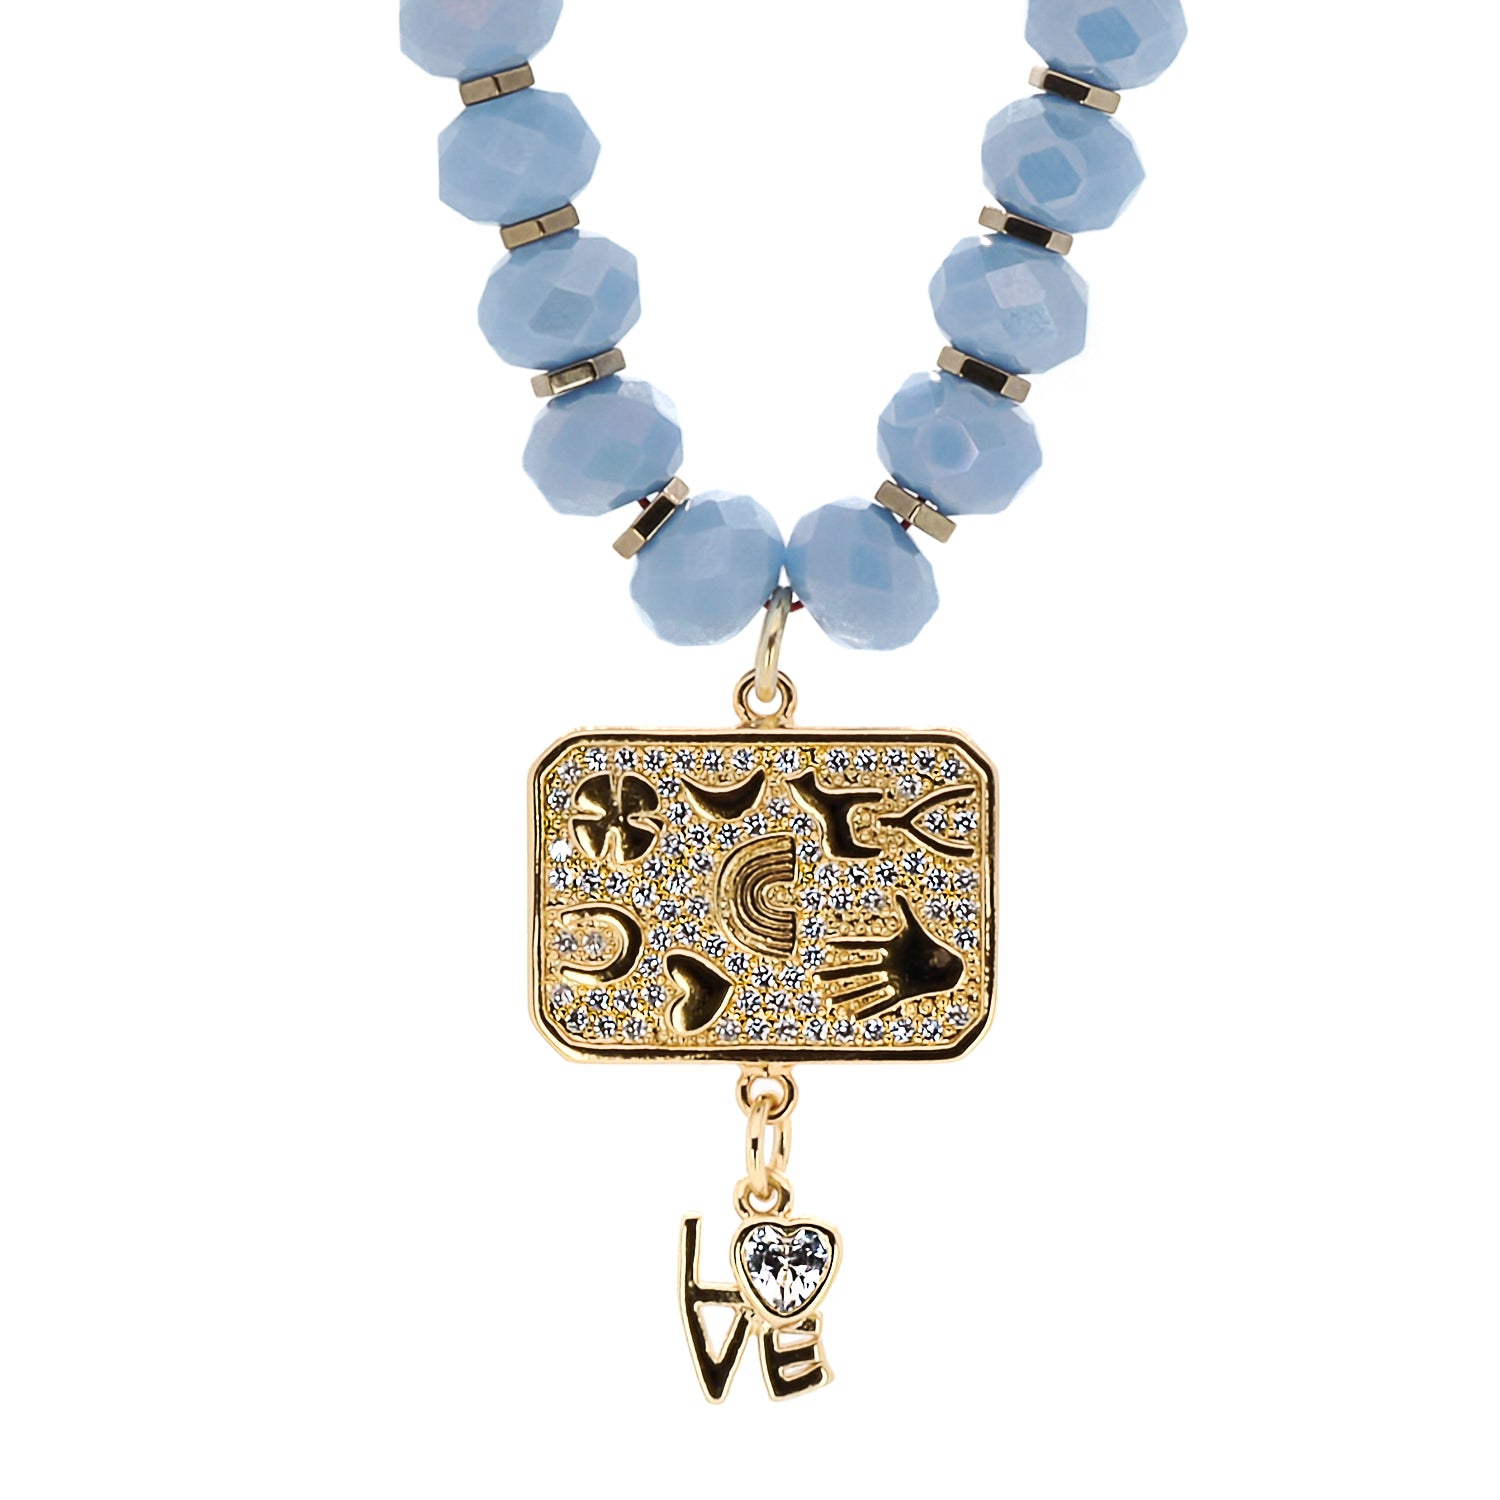 The blue crystal beads add a touch of sophistication to the design.